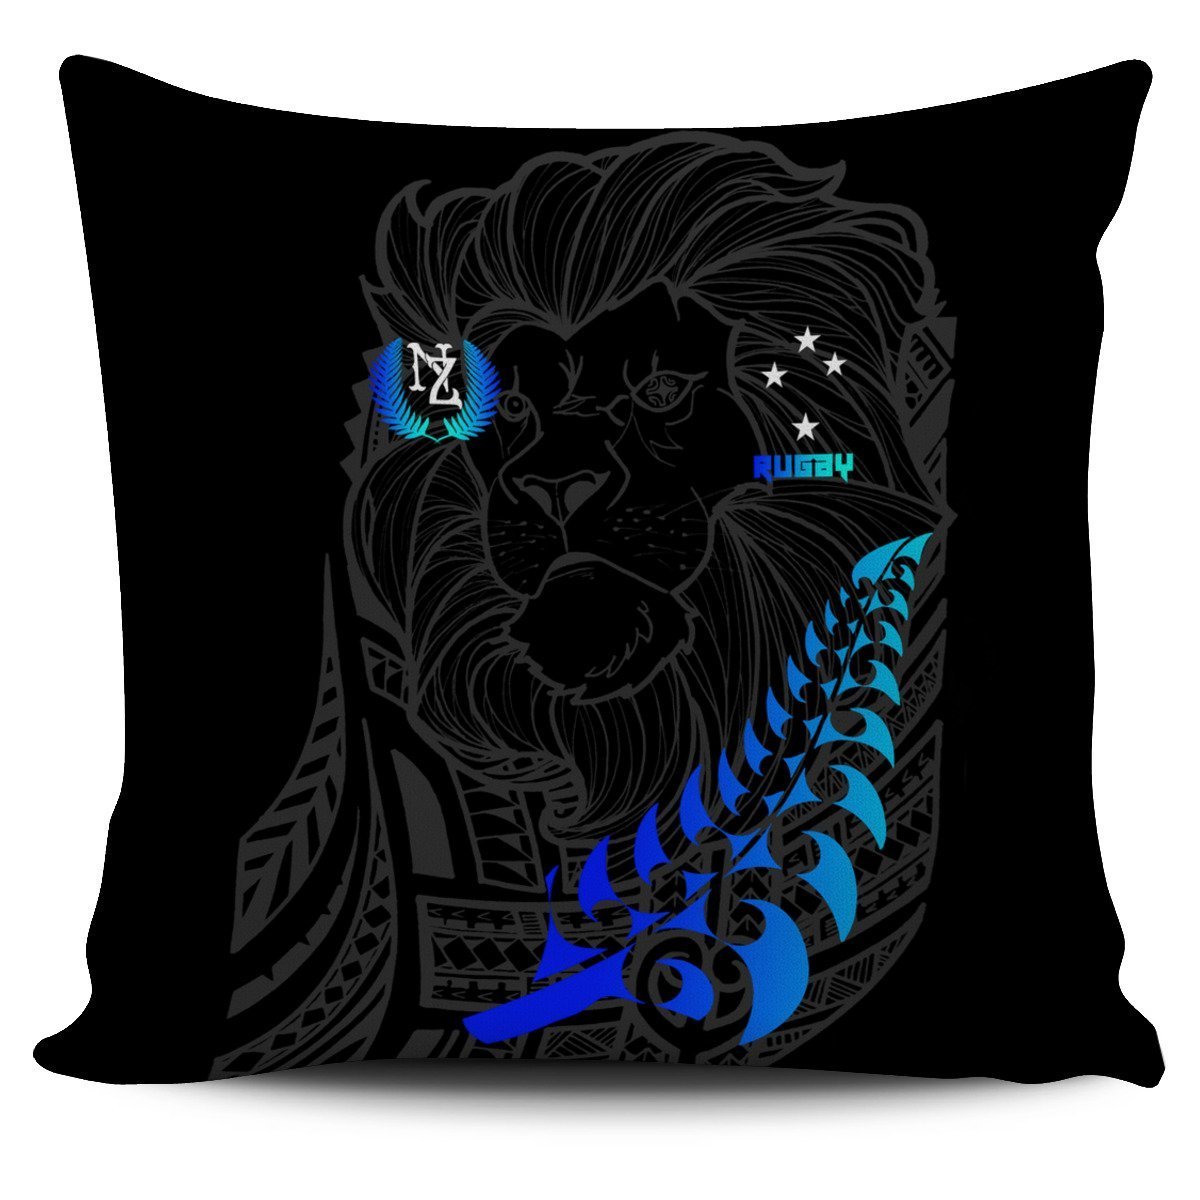 New Zealand Maori Lion Rugby Pillow Cover - Blue - Polynesian Pride